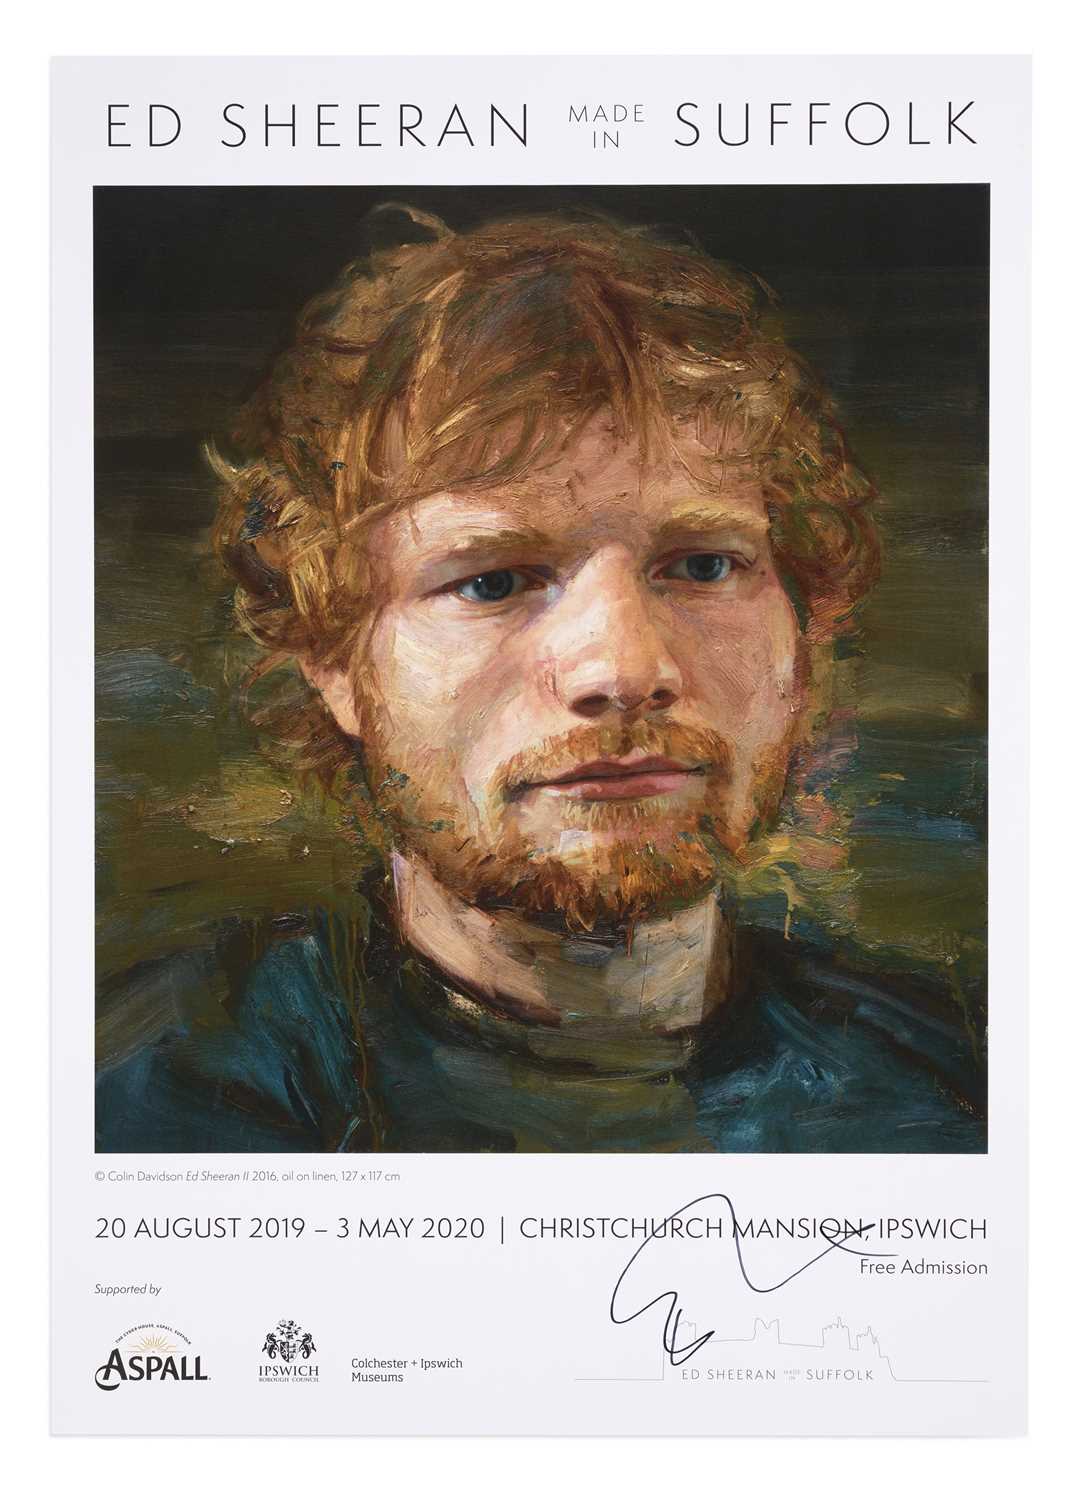 Signed Ed Sheeran: Made in Suffolk Exhibition Poster 2019 This is the official Ed Sheeran: Made in